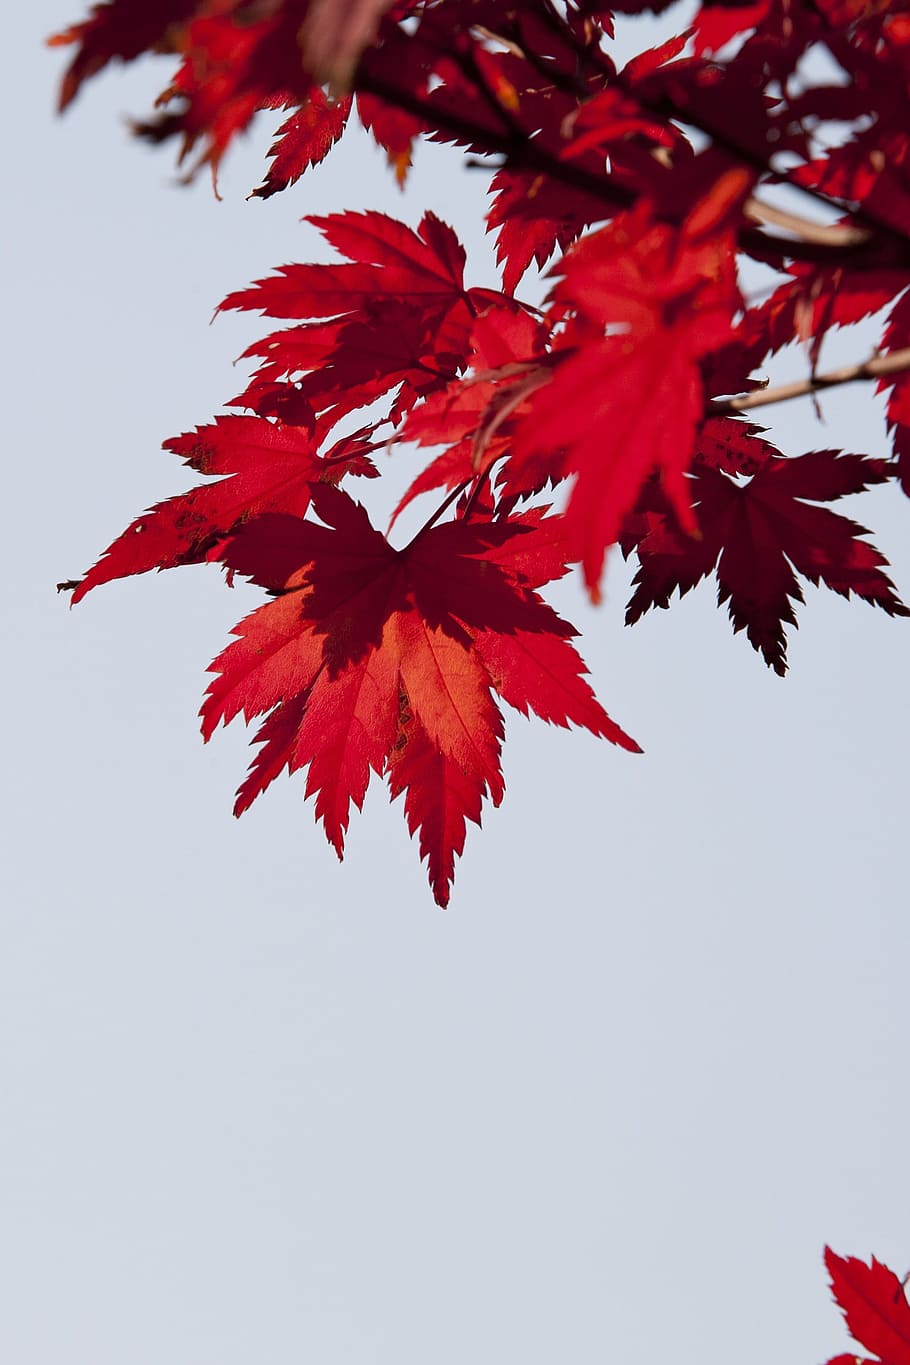 autumn leaves, red, nature, the leaves, landscape, seoul, wood